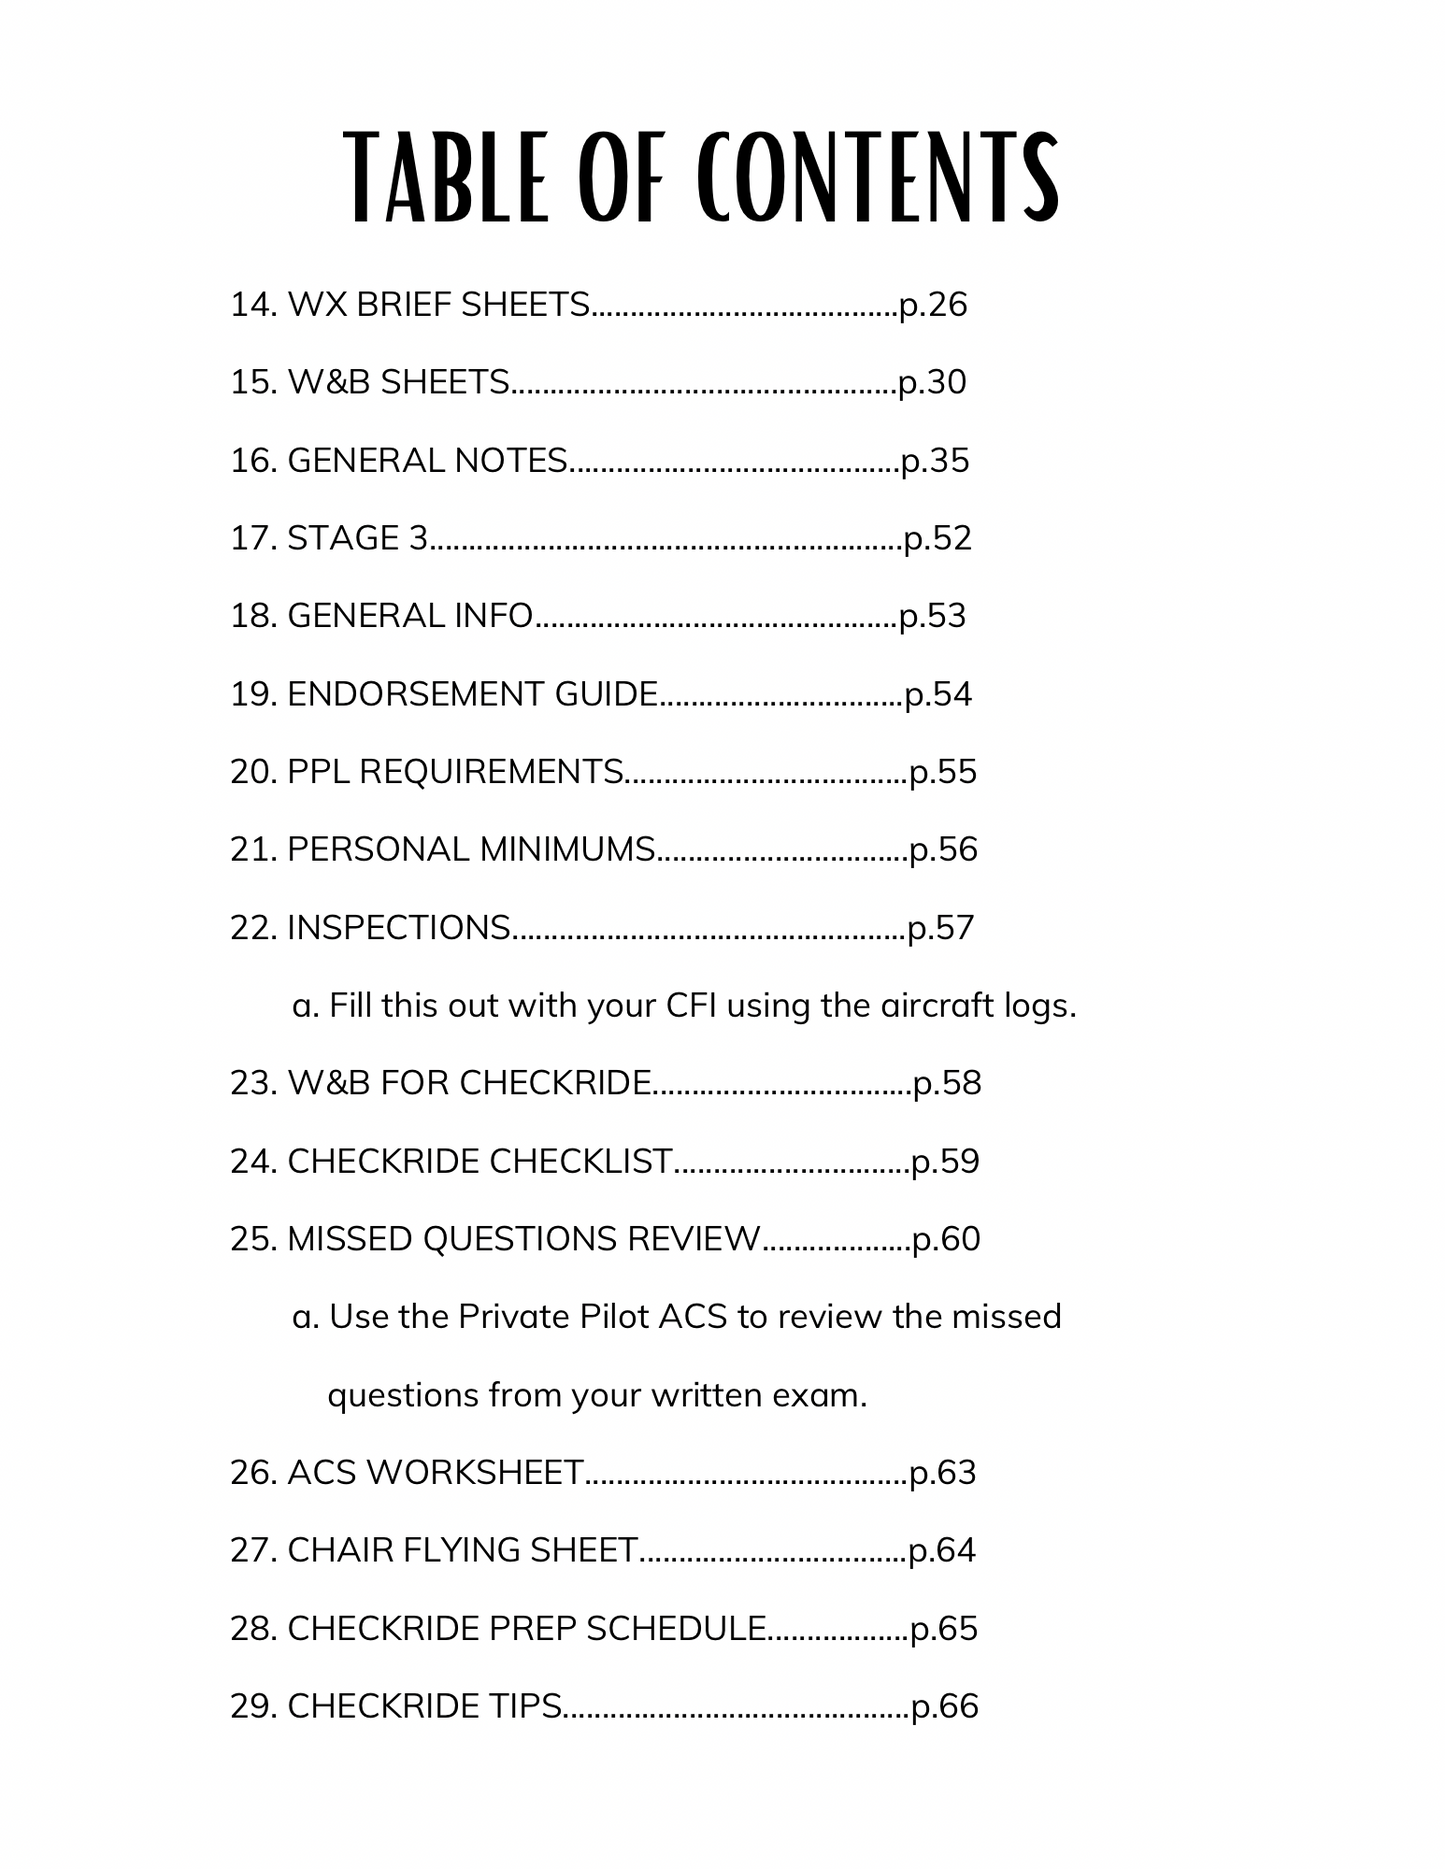 Table of contents for the aviator’s notebook. It lists all of the pages that were designed to help guide student pilots in their notetaking while they study during their flight training. 